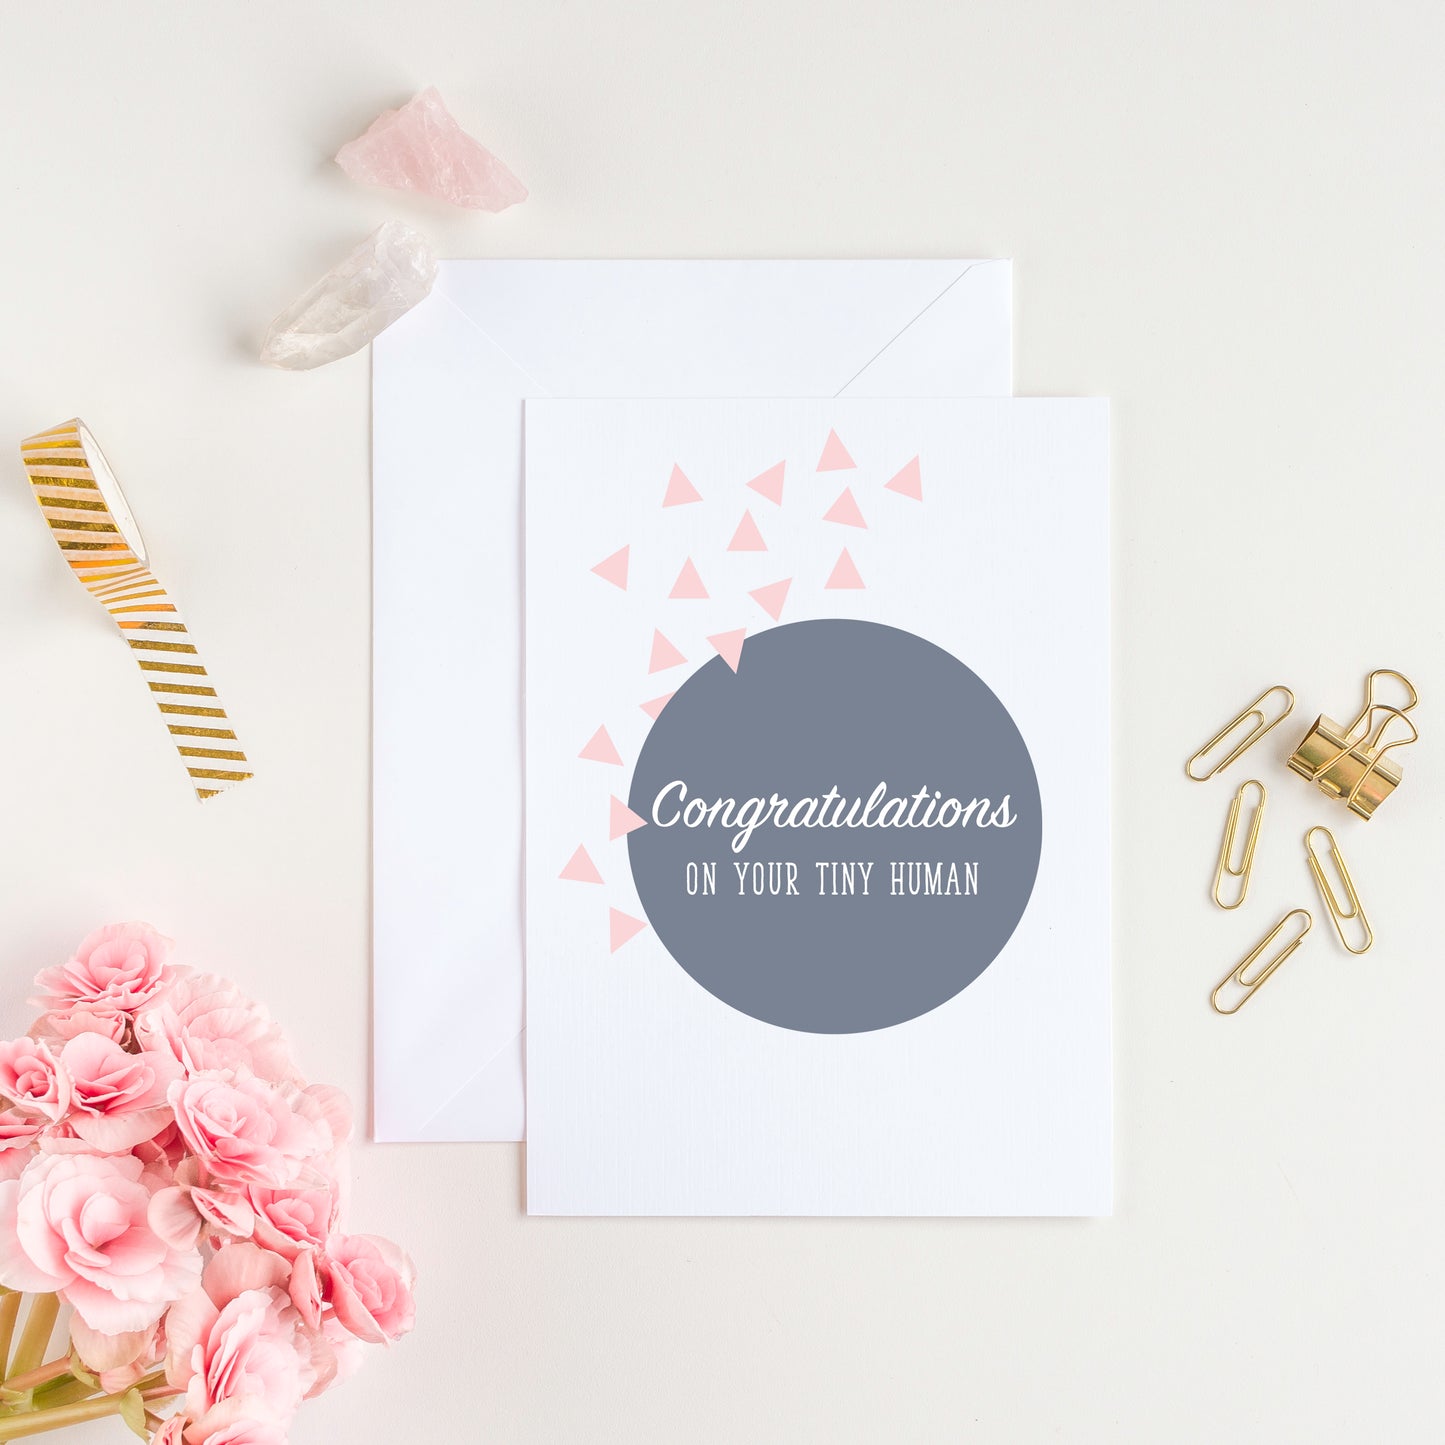 Congratulations on Your Tiny Human Card - Pink